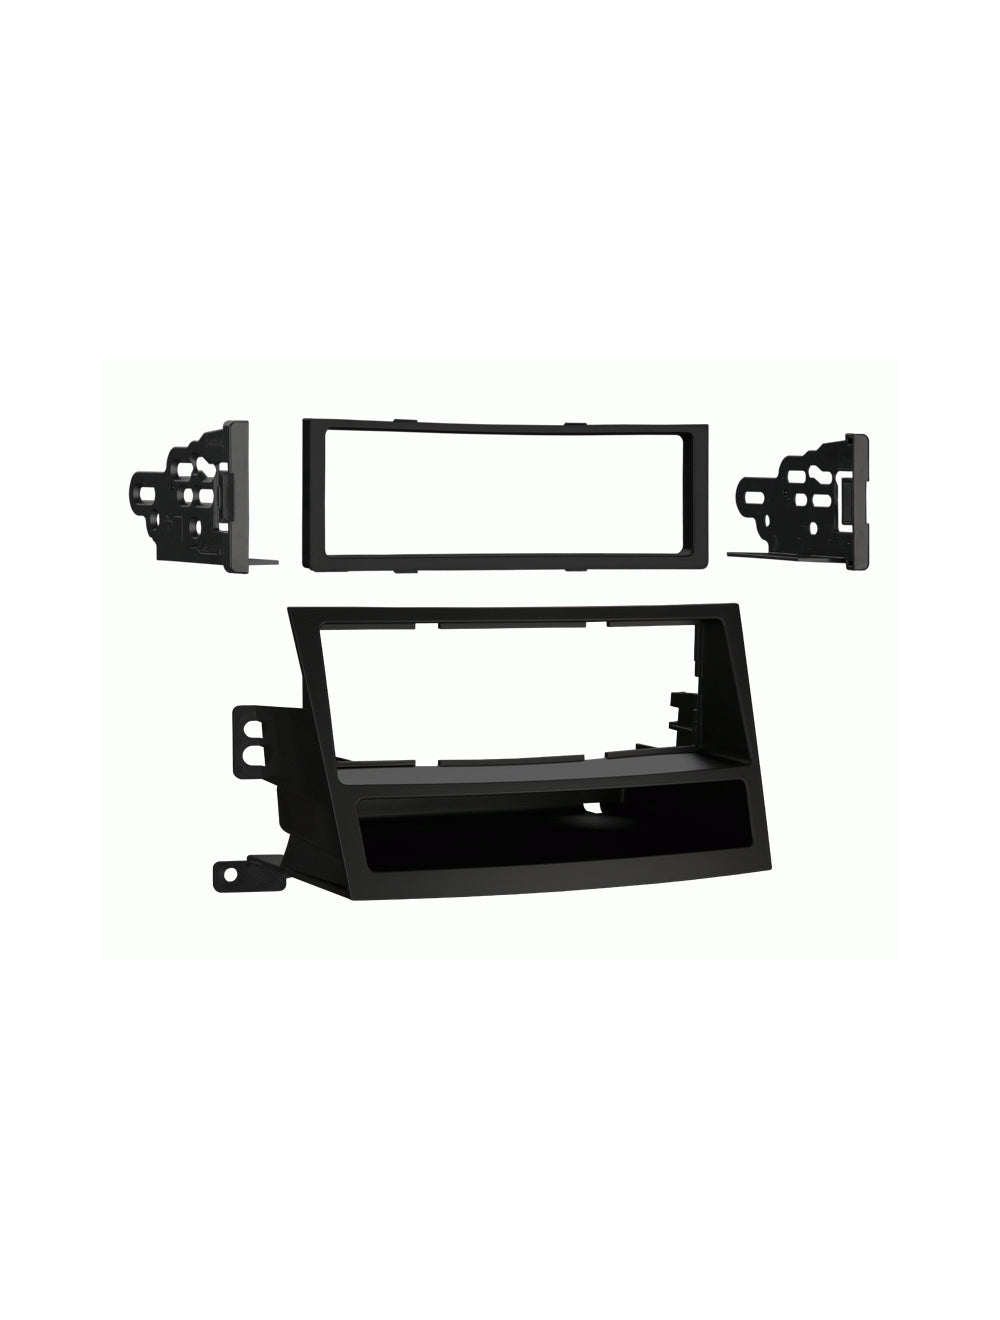 Metra 99-8903B Single DIN Installation Dash Kit for 2010-2014 Subaru Legacy and Outback